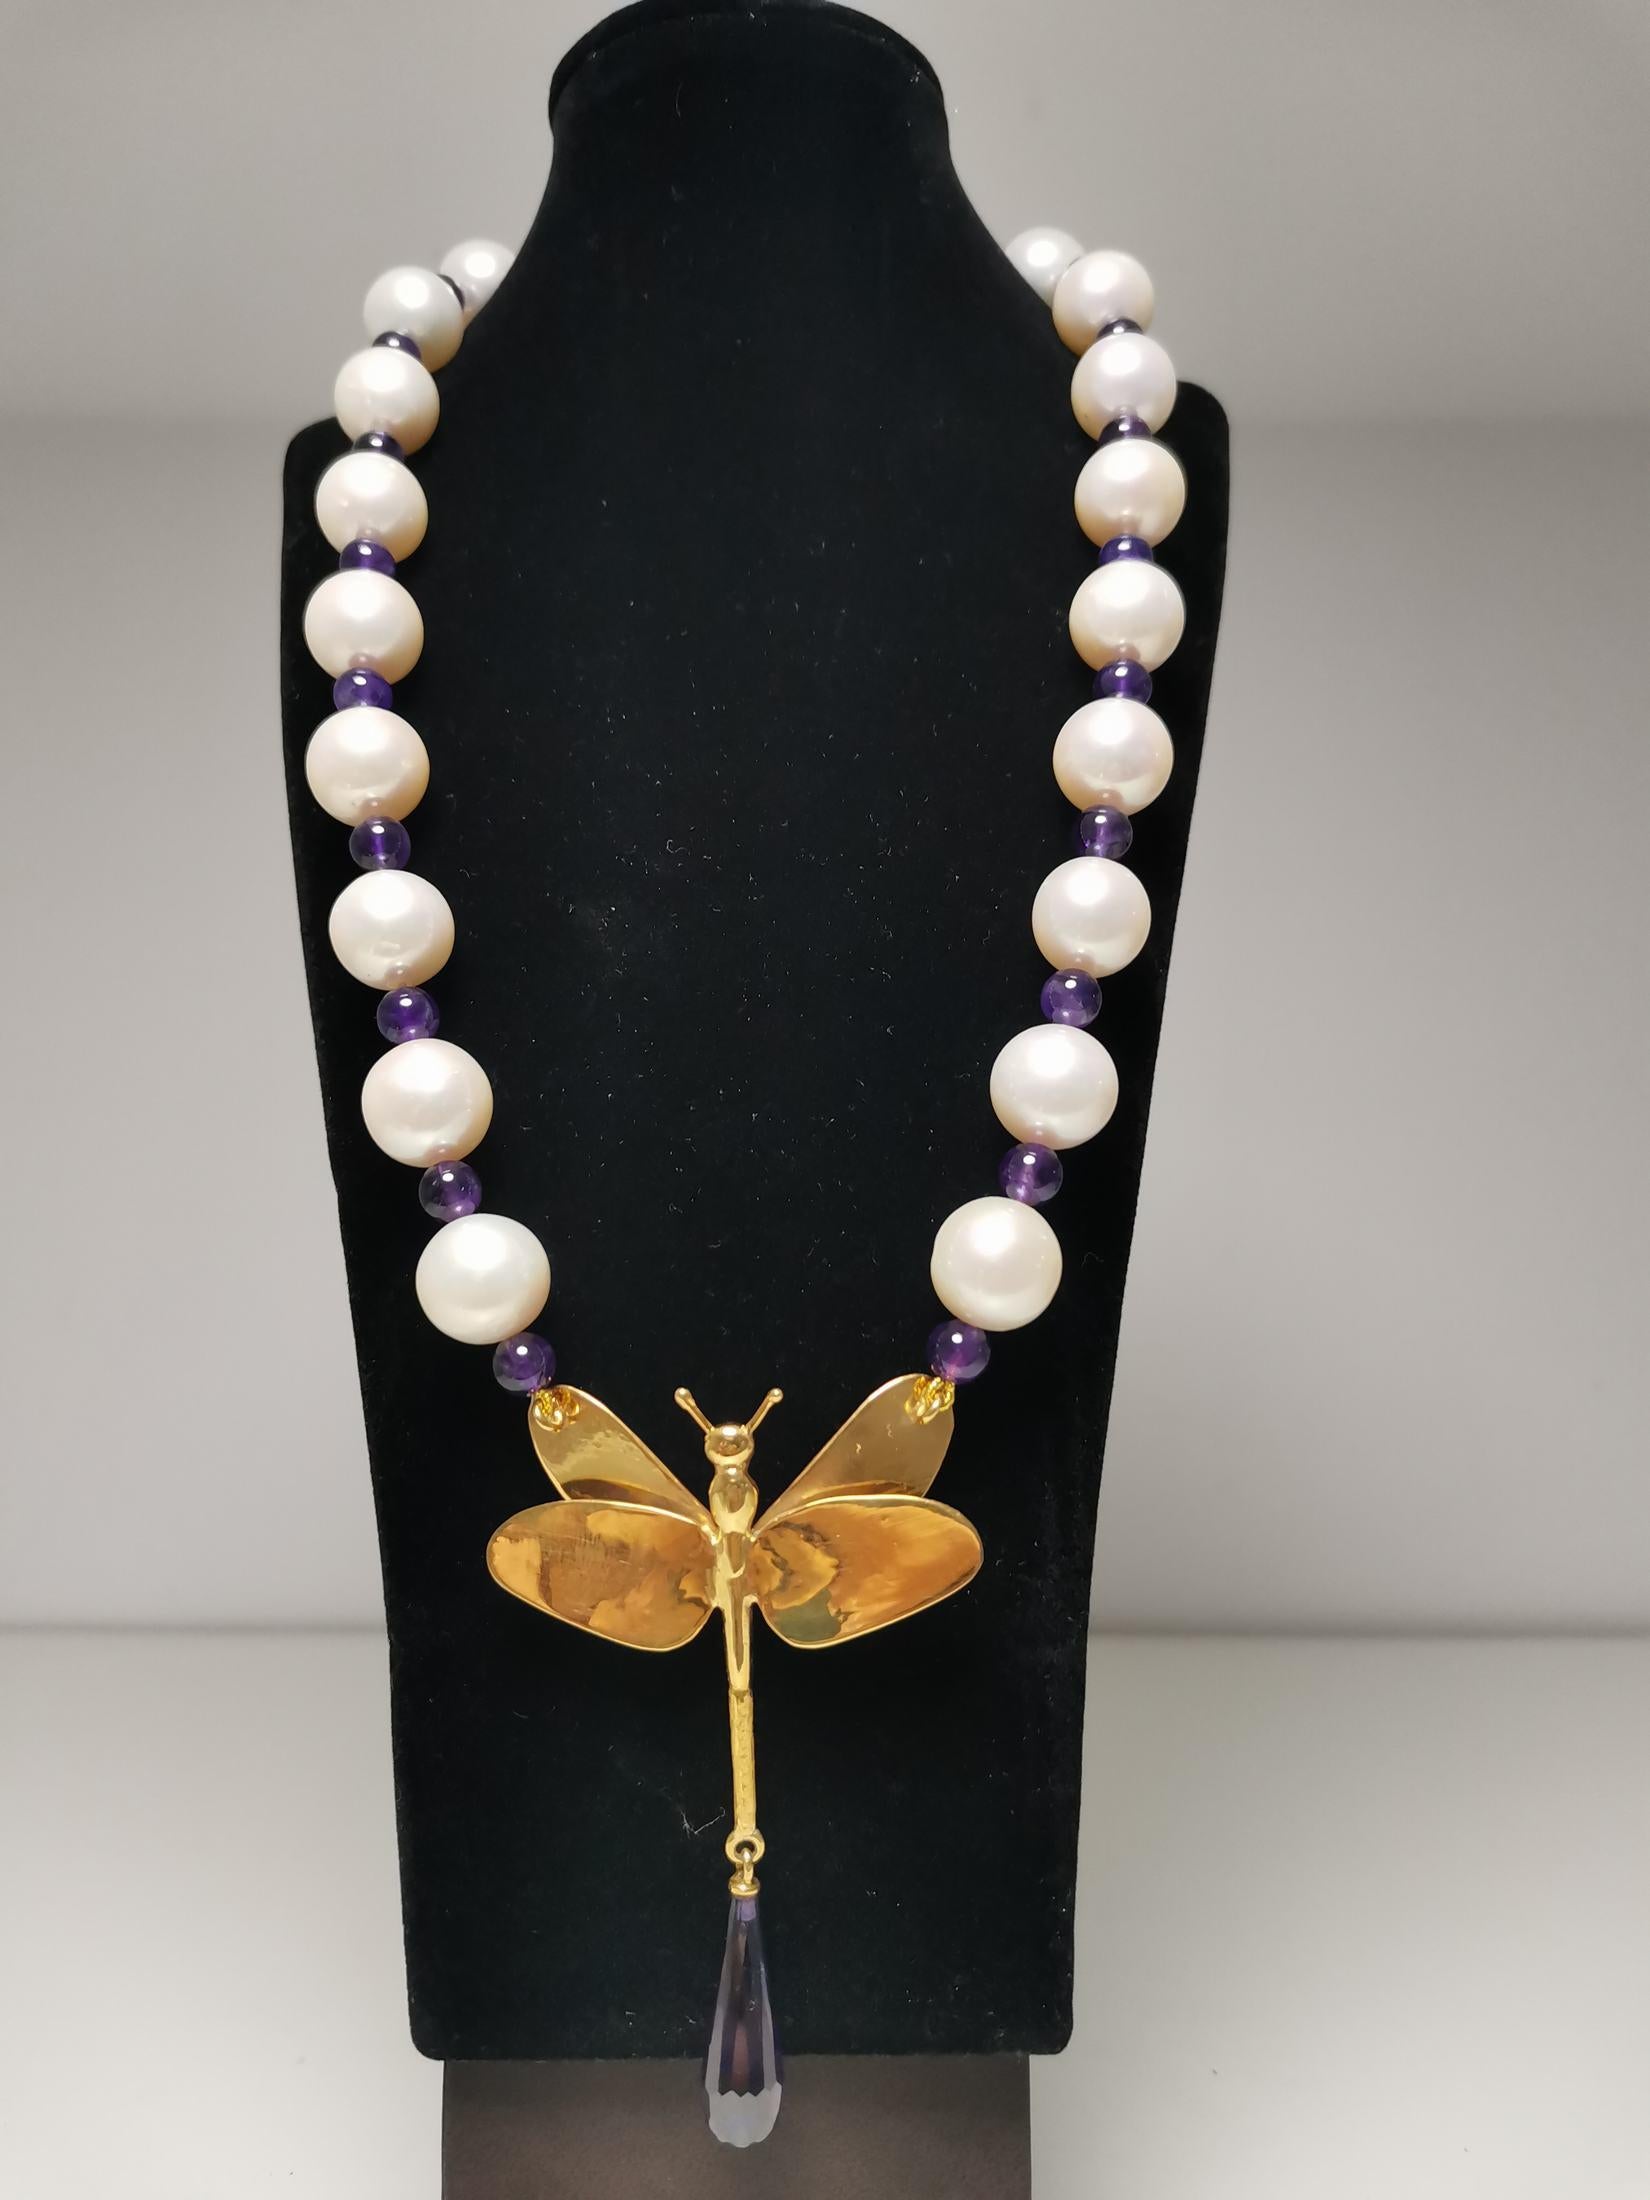 Japanese Beautiful Necklace of Cultured Pearls, Extra Quality 'Akoya Japan' and Amethysts